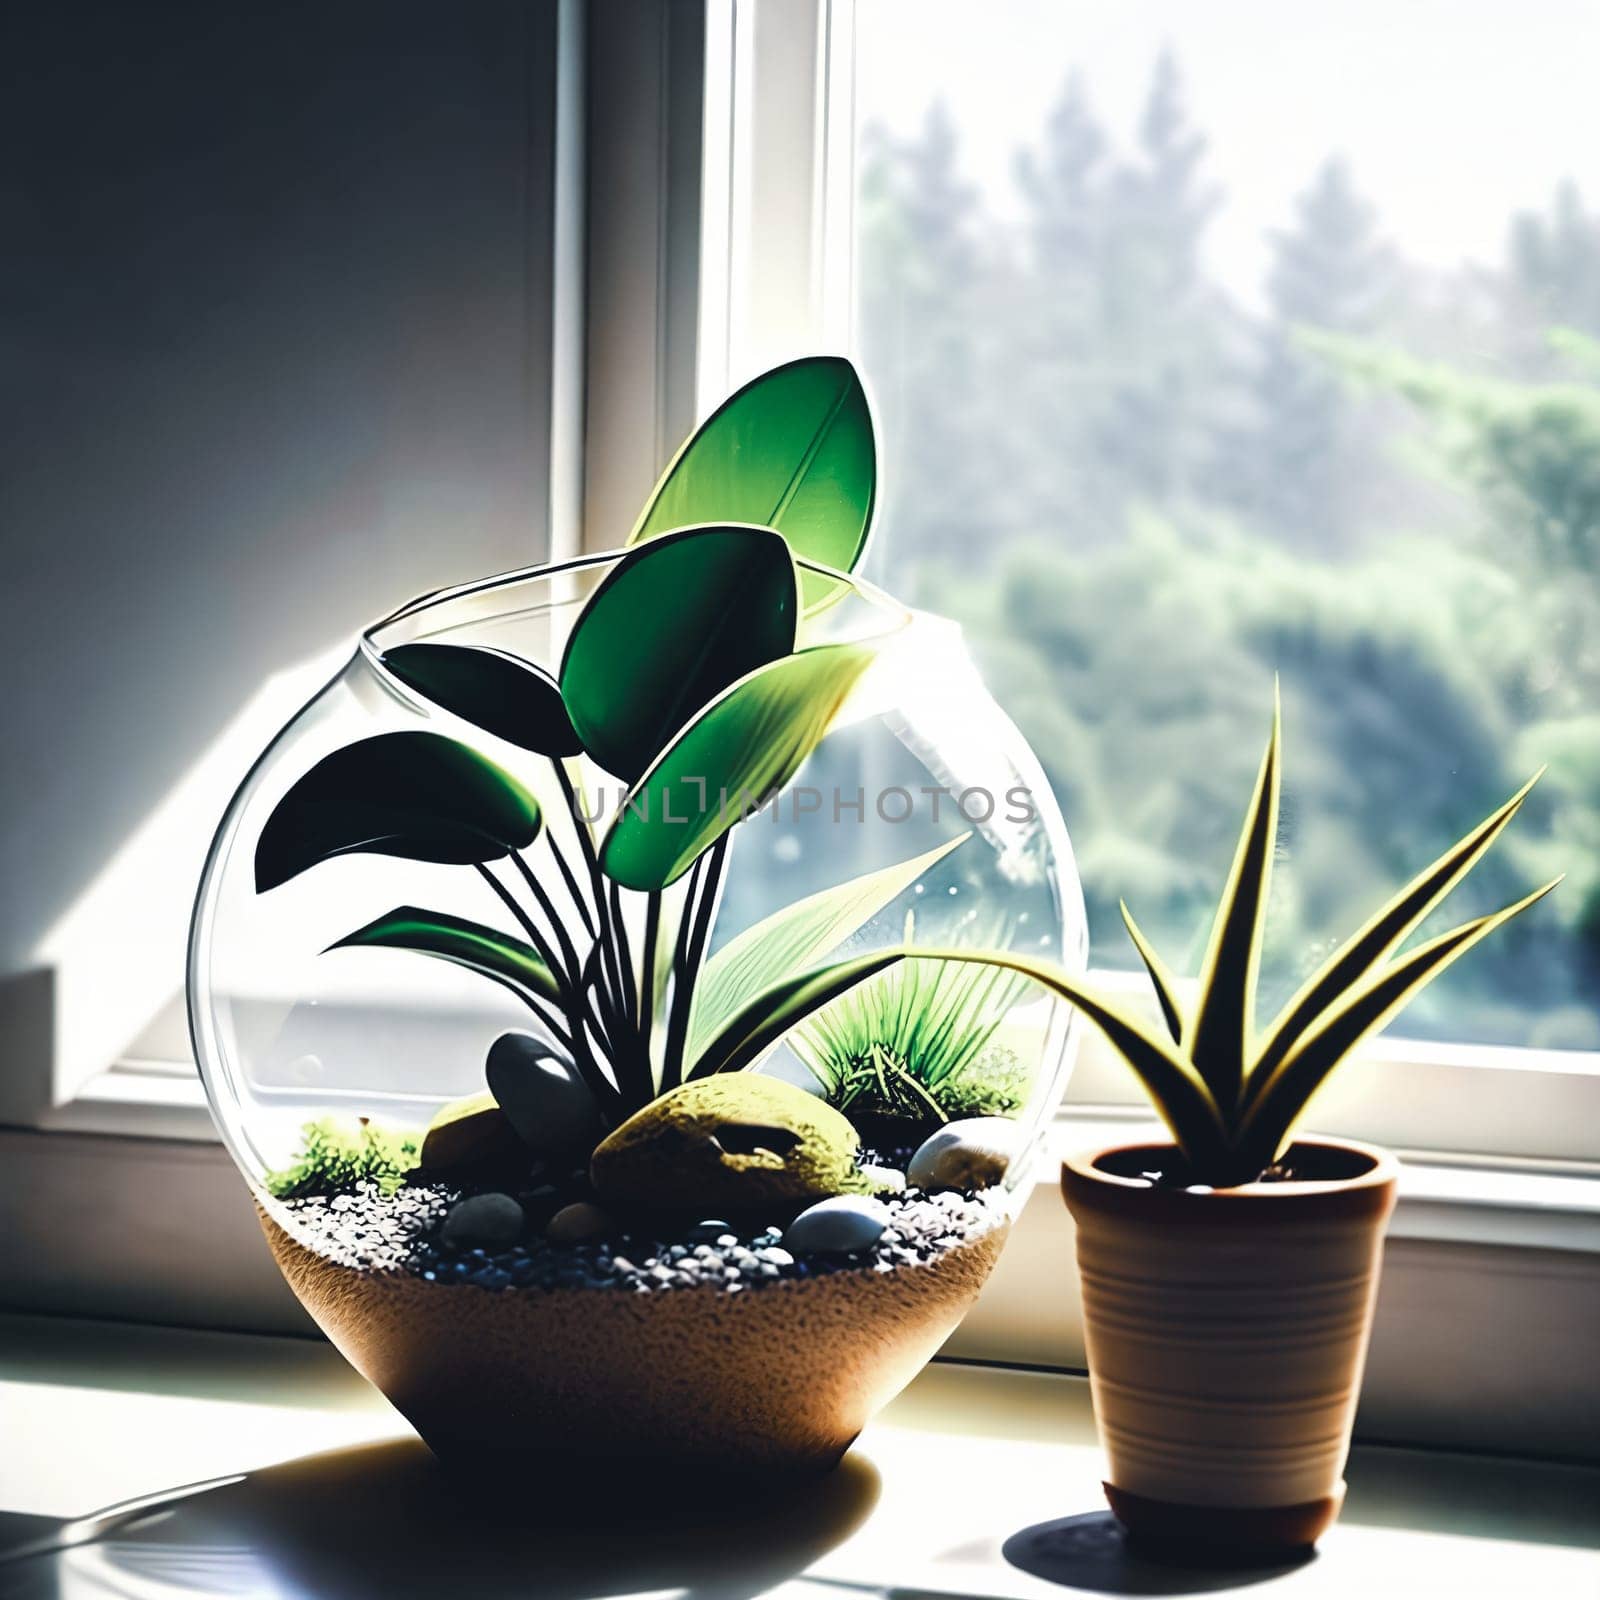 Minimalist terrarium sitting on a sunlit windowsill, showcasing the play of light and shadows on the tiny plants and pebbles.